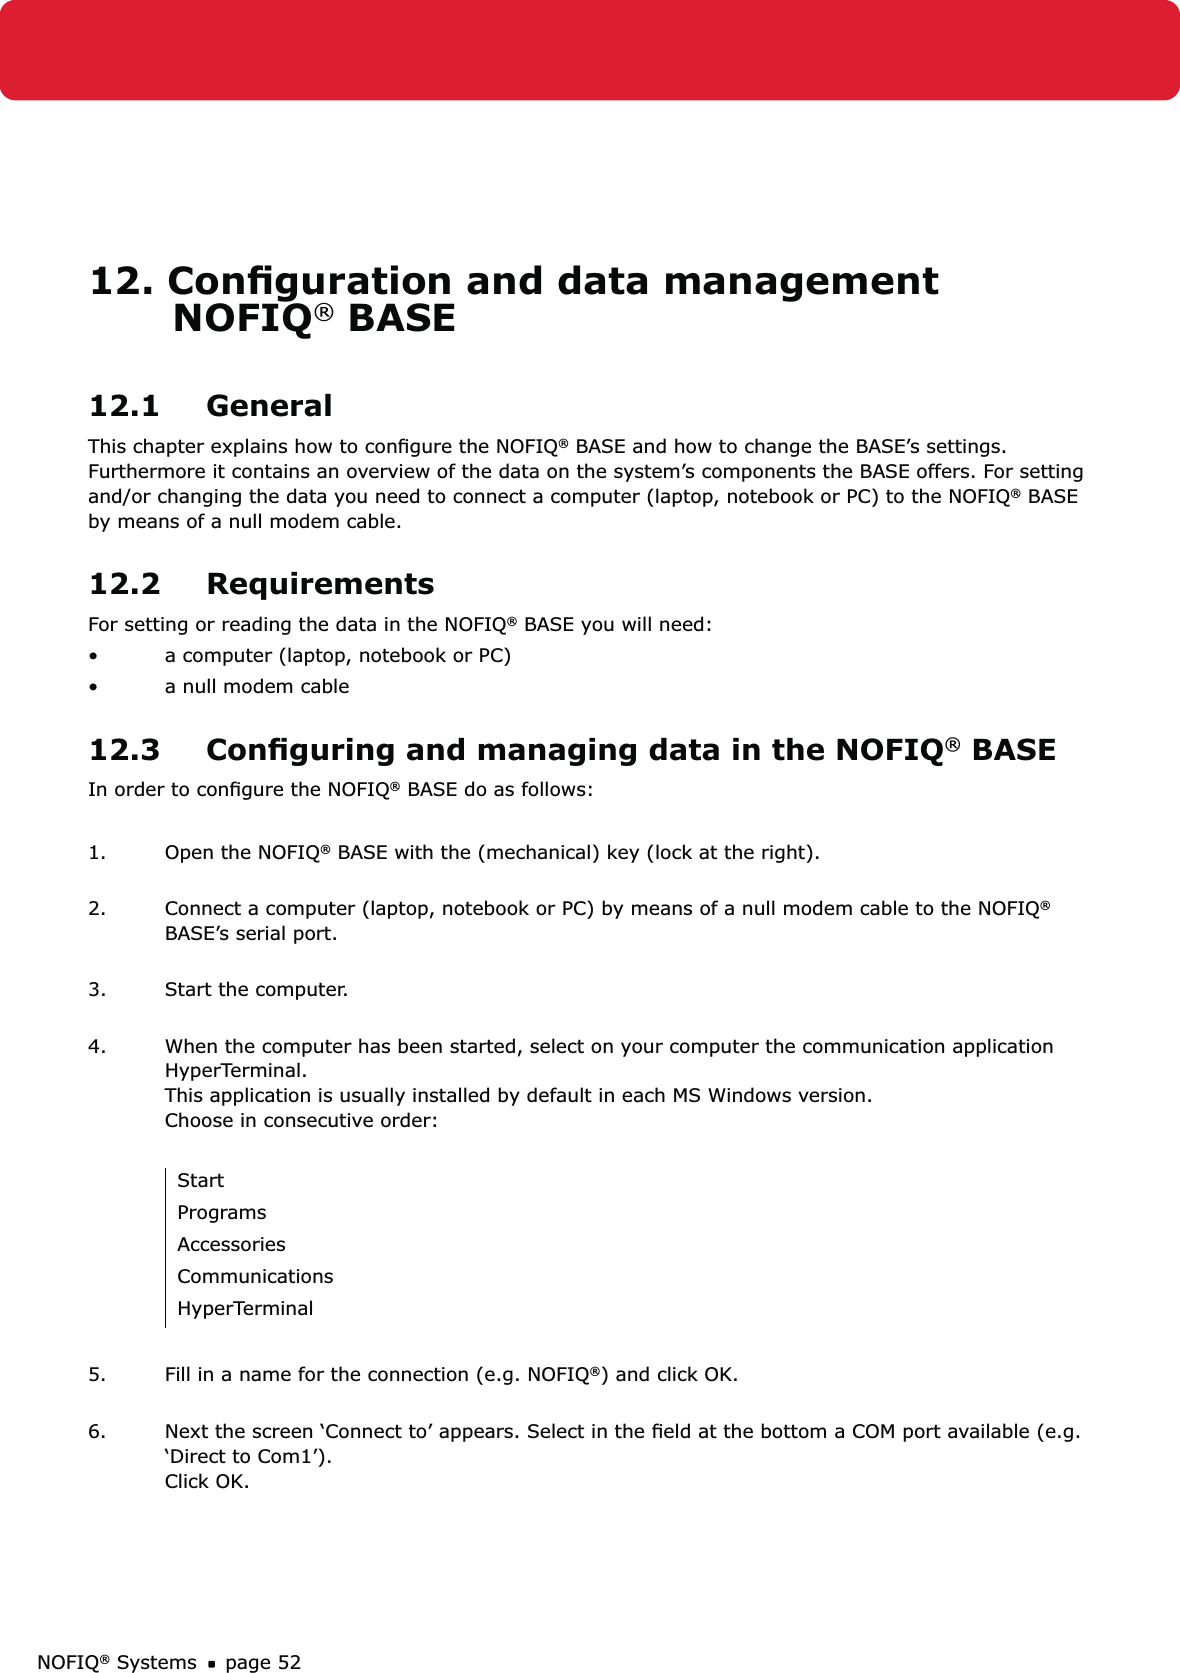 NOFIQ® Systems page 5212. Conﬁguration and data management    NOFIQ® BASE12.1 GeneralThis chapter explains how to conﬁgure the NOFIQ® BASE and how to change the BASE’s settings. Furthermore it contains an overview of the data on the system’s components the BASE offers. For setting and/or changing the data you need to connect a computer (laptop, notebook or PC) to the NOFIQ® BASE by means of a null modem cable. 12.2 RequirementsFor setting or reading the data in the NOFIQ® BASE you will need:a computer (laptop, notebook or PC)• a null modem cable • 12.3  Conﬁguring and managing data in the NOFIQ® BASEIn order to conﬁgure the NOFIQ® BASE do as follows:1.  Open the NOFIQ® BASE with the (mechanical) key (lock at the right). 2.  Connect a computer (laptop, notebook or PC) by means of a null modem cable to the NOFIQ® BASE’s serial port.  3.  Start the computer. 4.  When the computer has been started, select on your computer the communication application HyperTerminal. This application is usually installed by default in each MS Windows version.  Choose in consecutive order: StartProgramsAccessoriesCommunicationsHyperTerminal5.  Fill in a name for the connection (e.g. NOFIQ®) and click OK. 6.  Next the screen ‘Connect to’ appears. Select in the ﬁeld at the bottom a COM port available (e.g. ‘Direct to Com1’).  Click OK. 